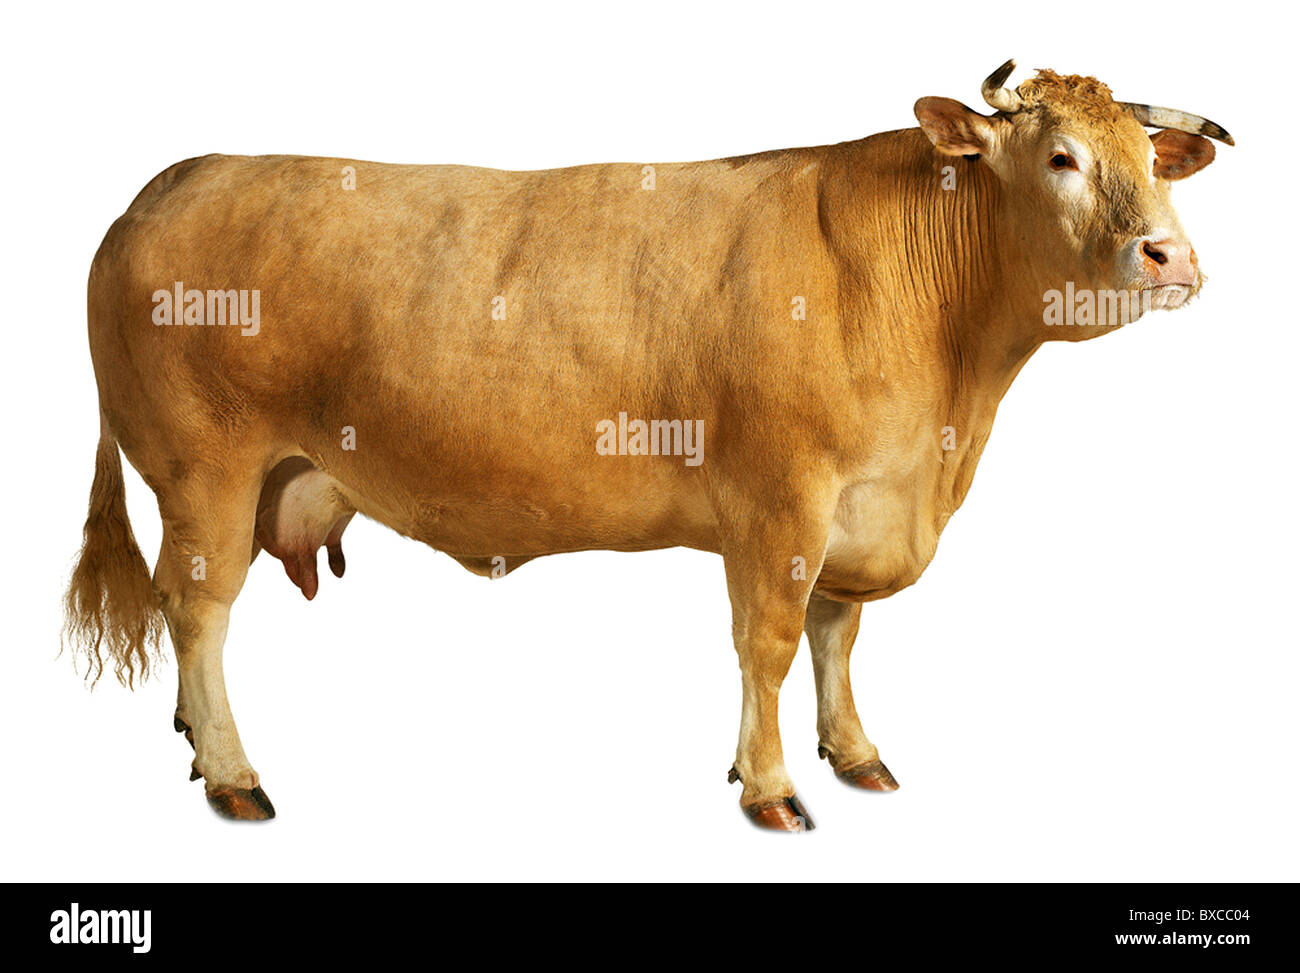 Race of oxen Cut Out Stock Images & Pictures - Alamy